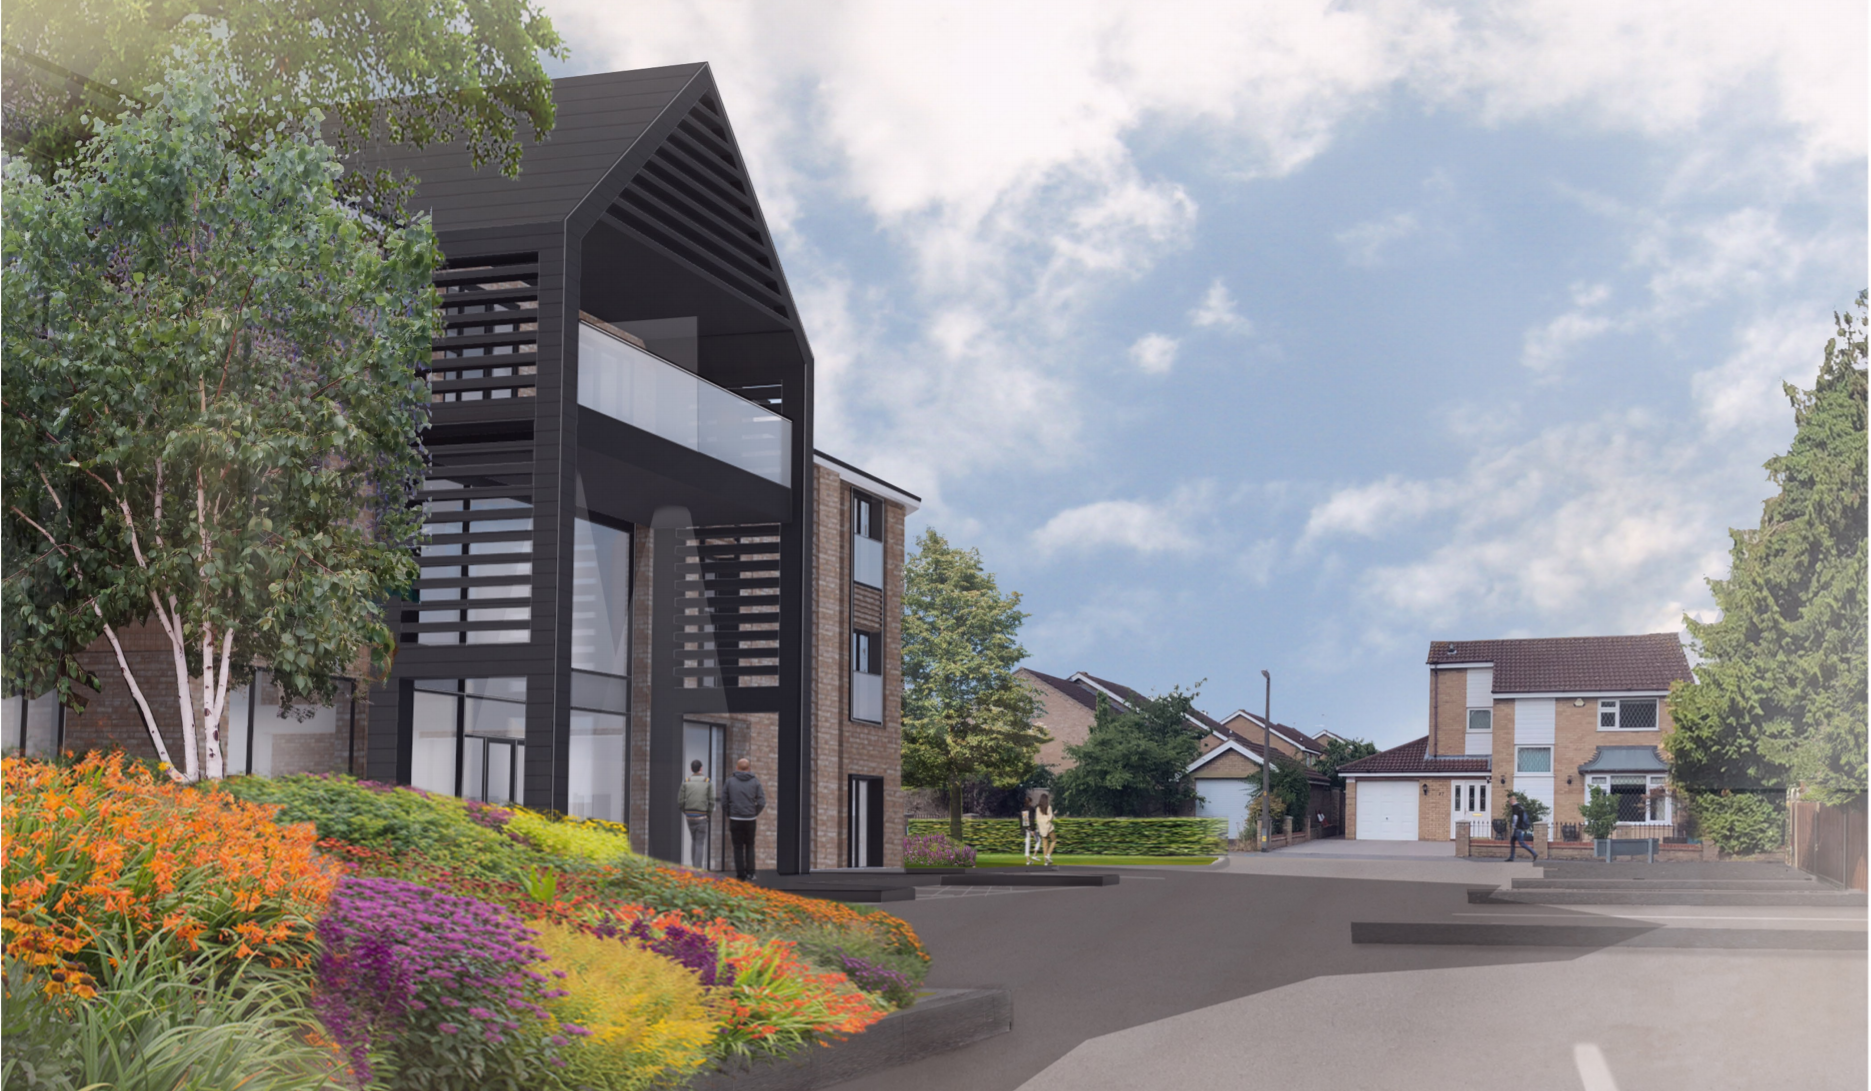 An artists impression of the development site which features a glass front to the property and modern architecture.